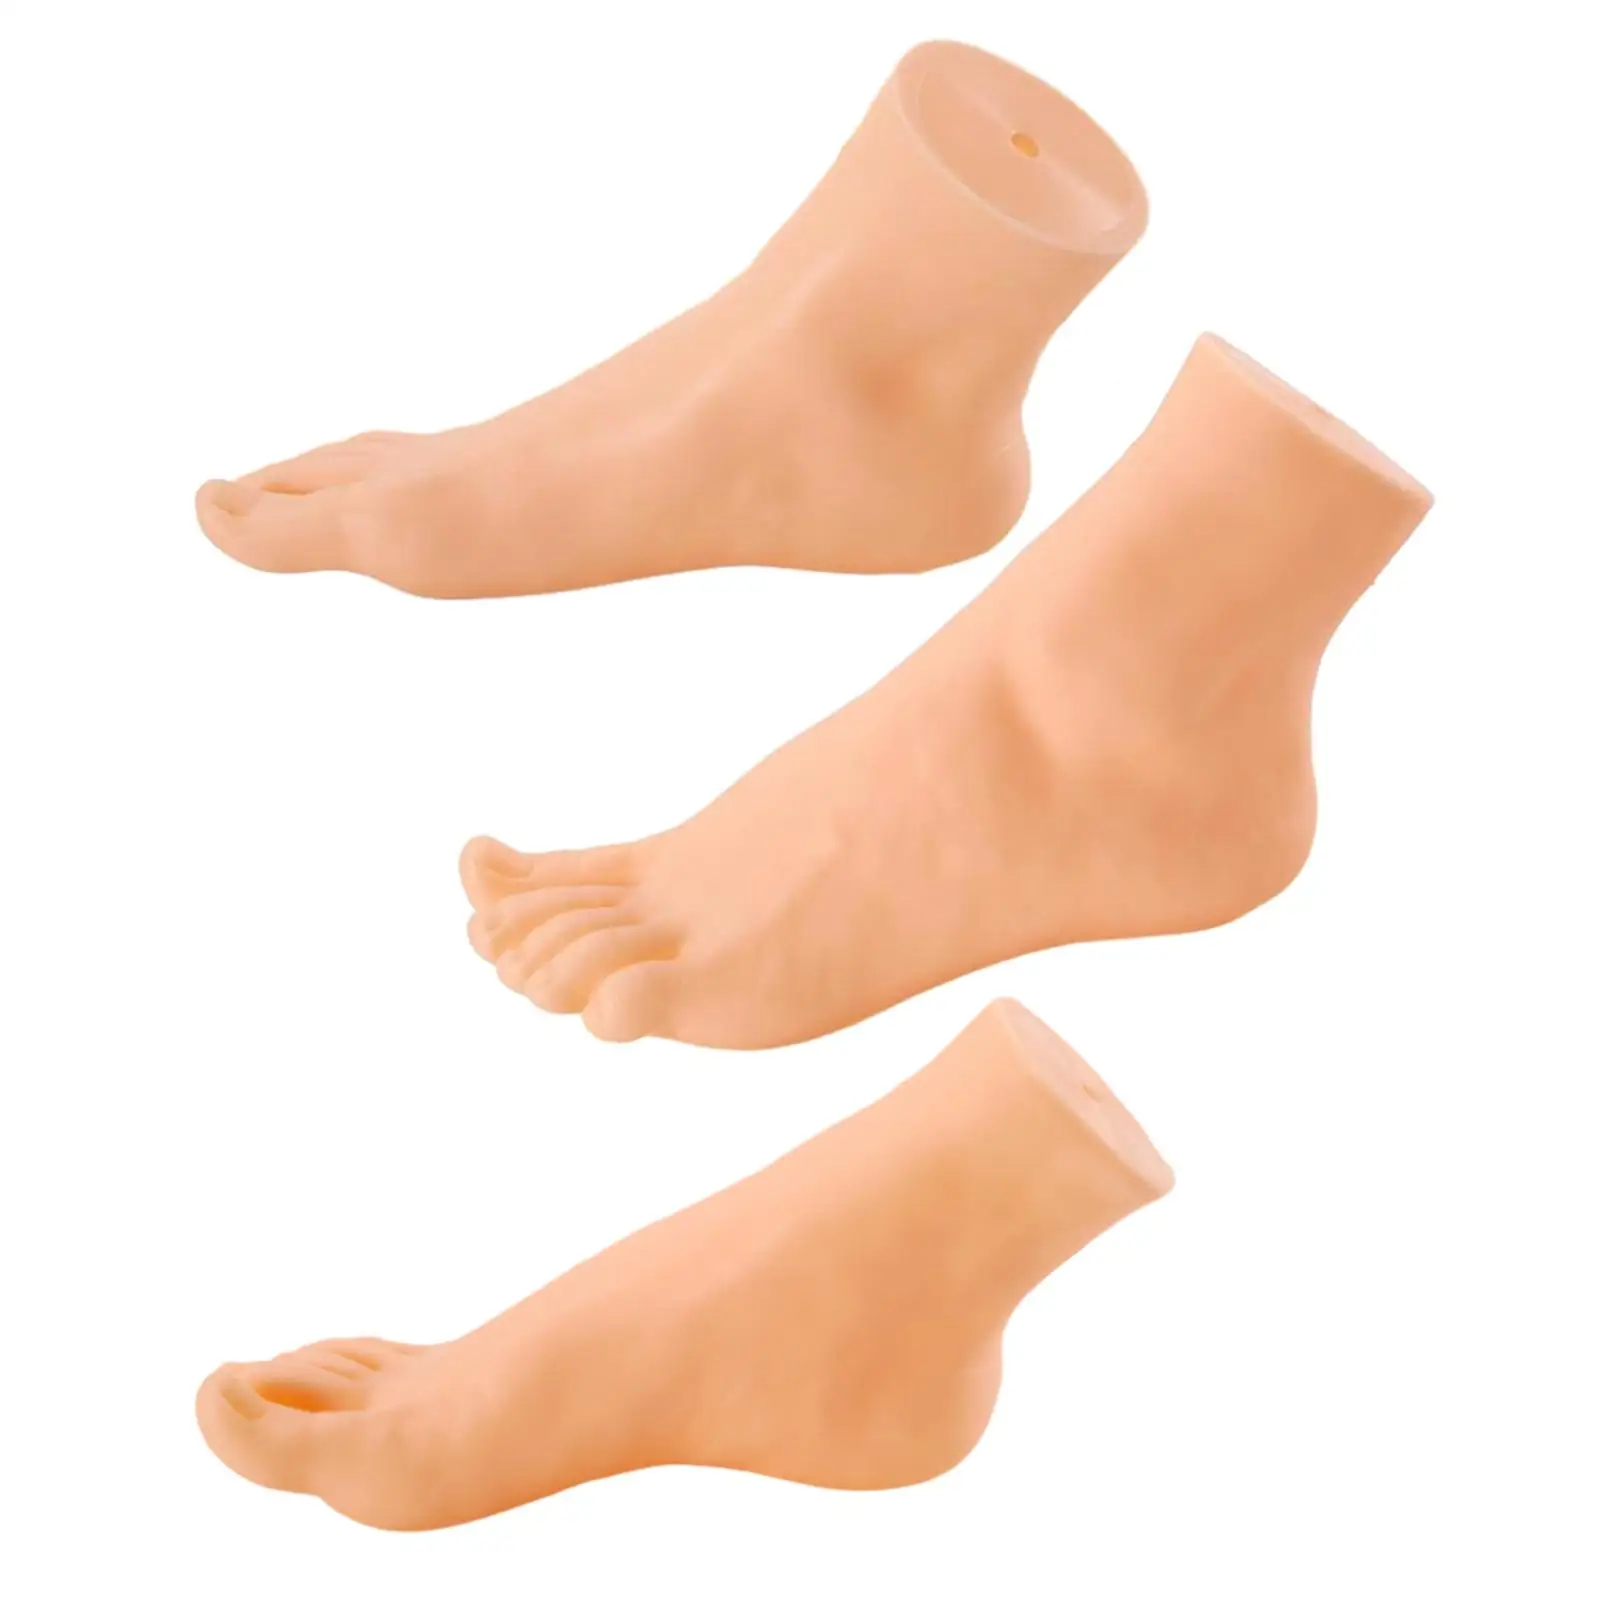 Mannequin Foot Display Lightweight Shoes Display Props Foot Model Stand Tools for Shop Retail Socks Short Stocking Display